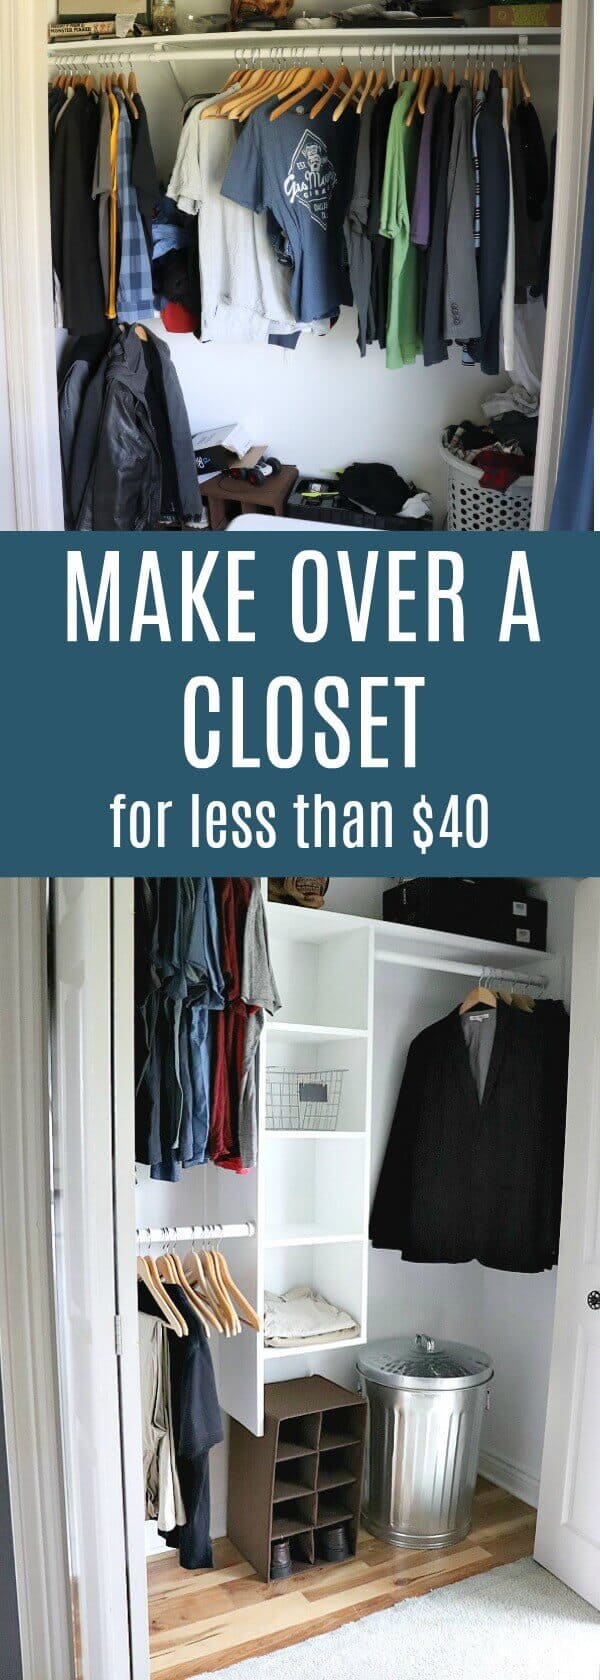 We are transforming our son's room into an Budget Friendly Industrial Teen Room for the One Room Challenge. The week - we are making over a closet for less than $40!